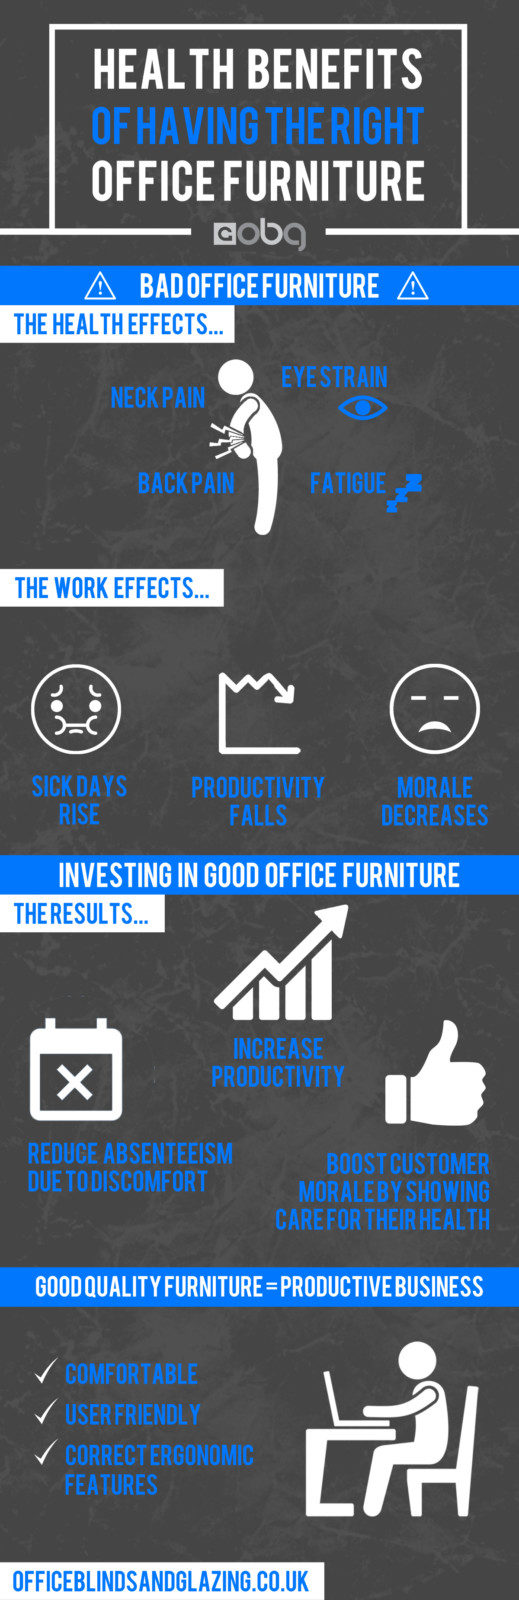 health benefits of having the right office furniture